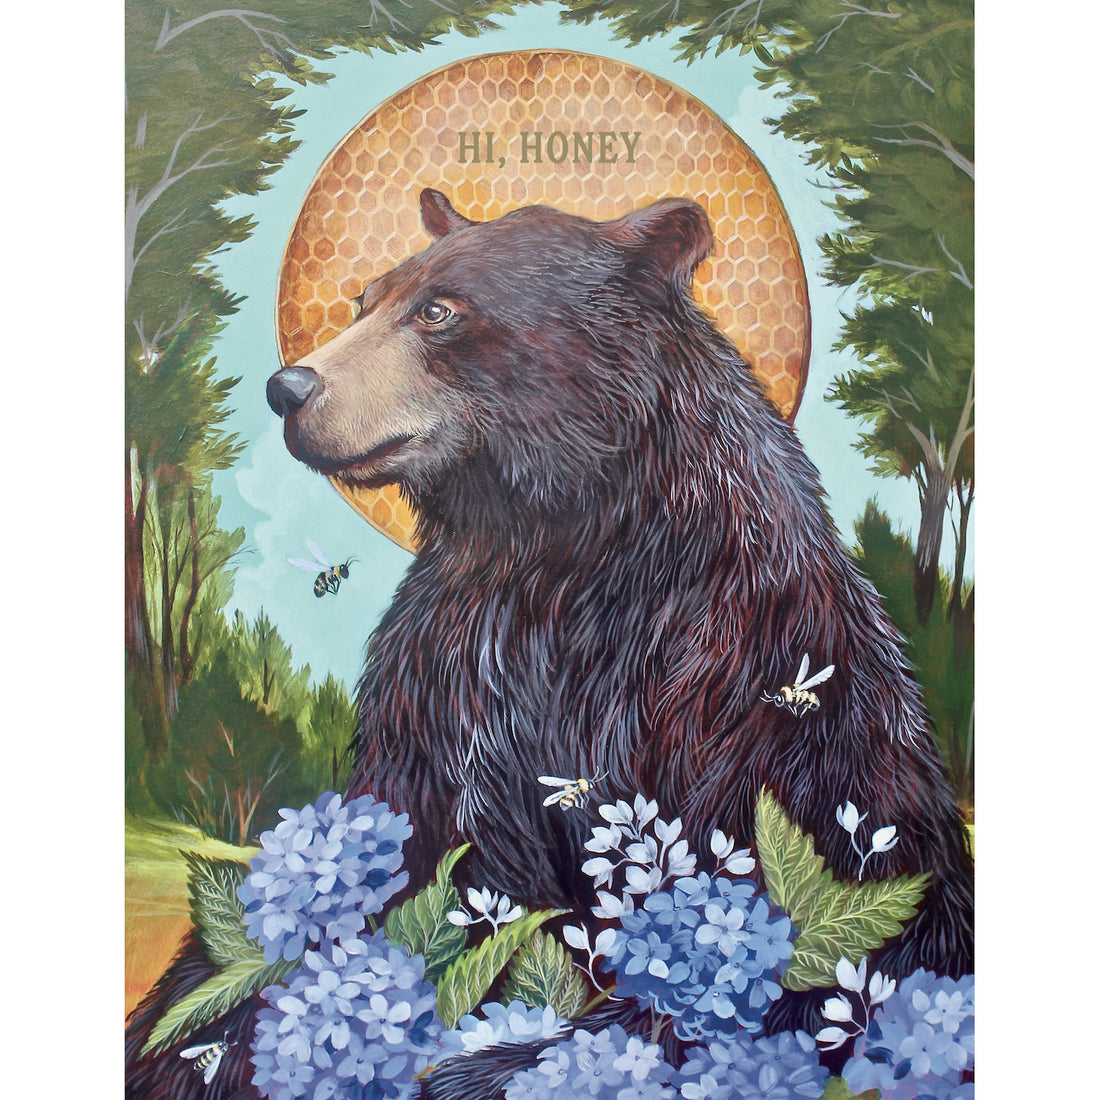 A whimsical illustration of a black bear sitting in a forest scene with vibrant blue blooms attracting bees, with a circle of golden honeycomb behind the bear&